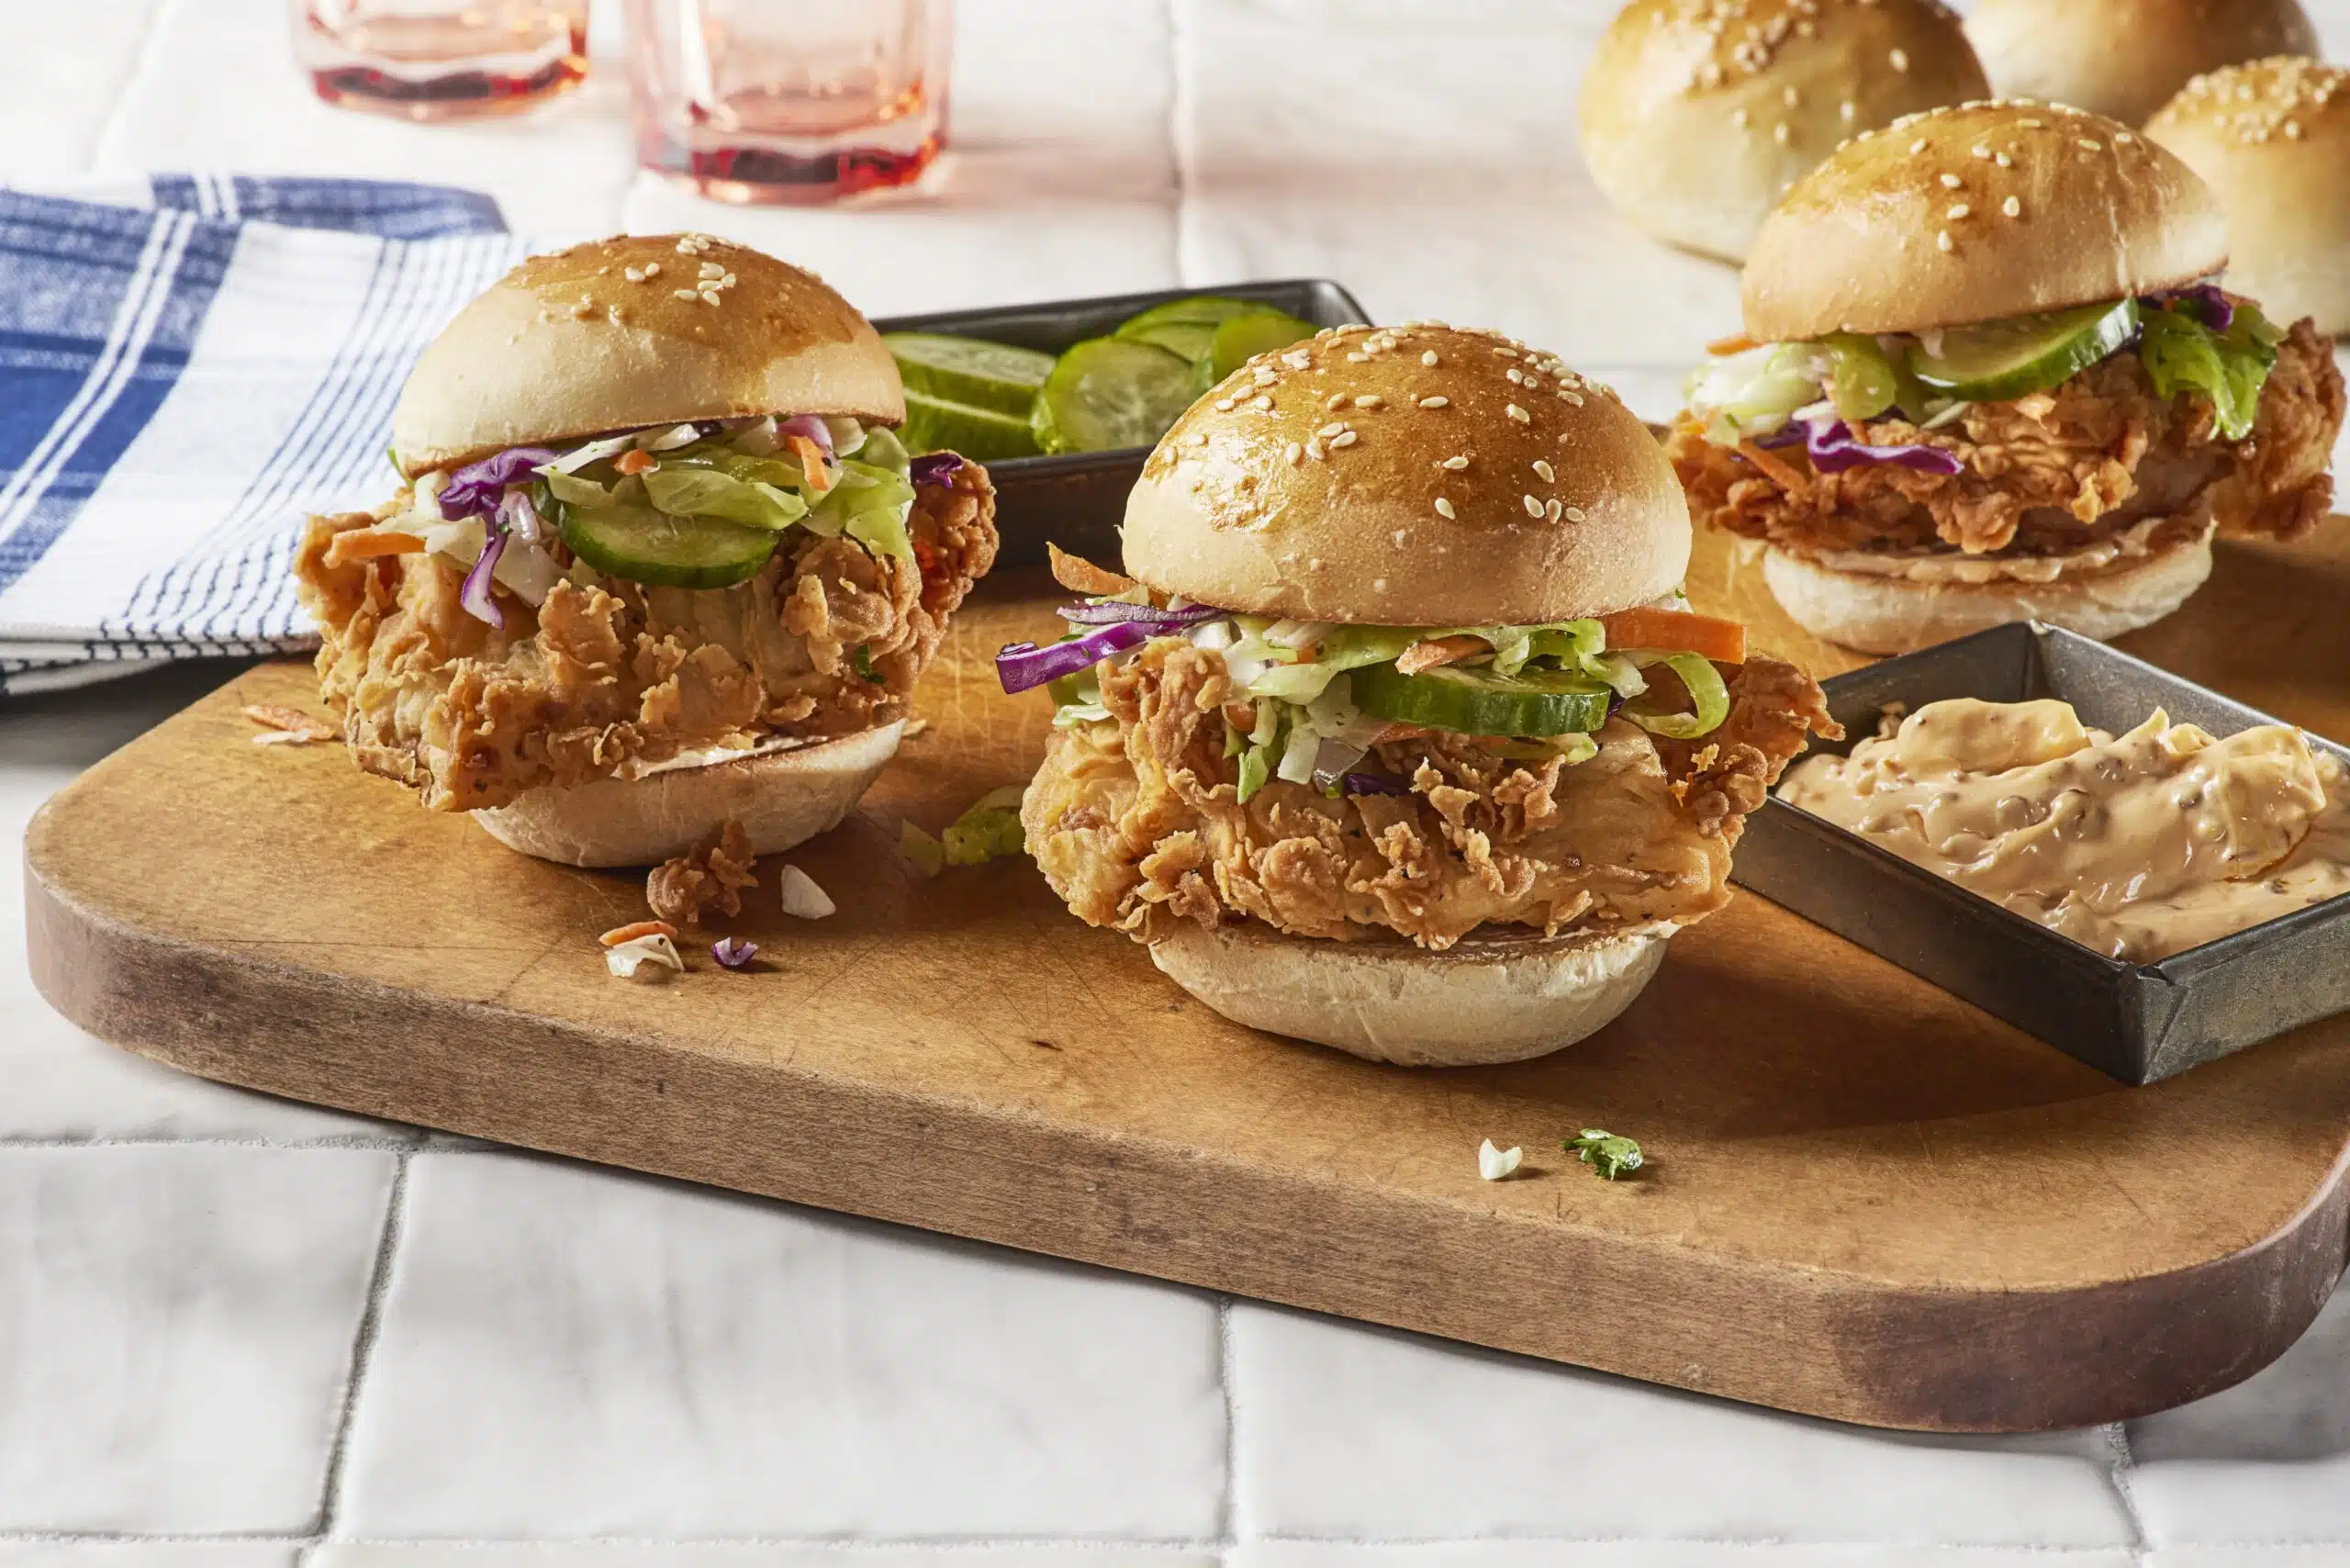 Featured image for “Fried Chicken Sliders”